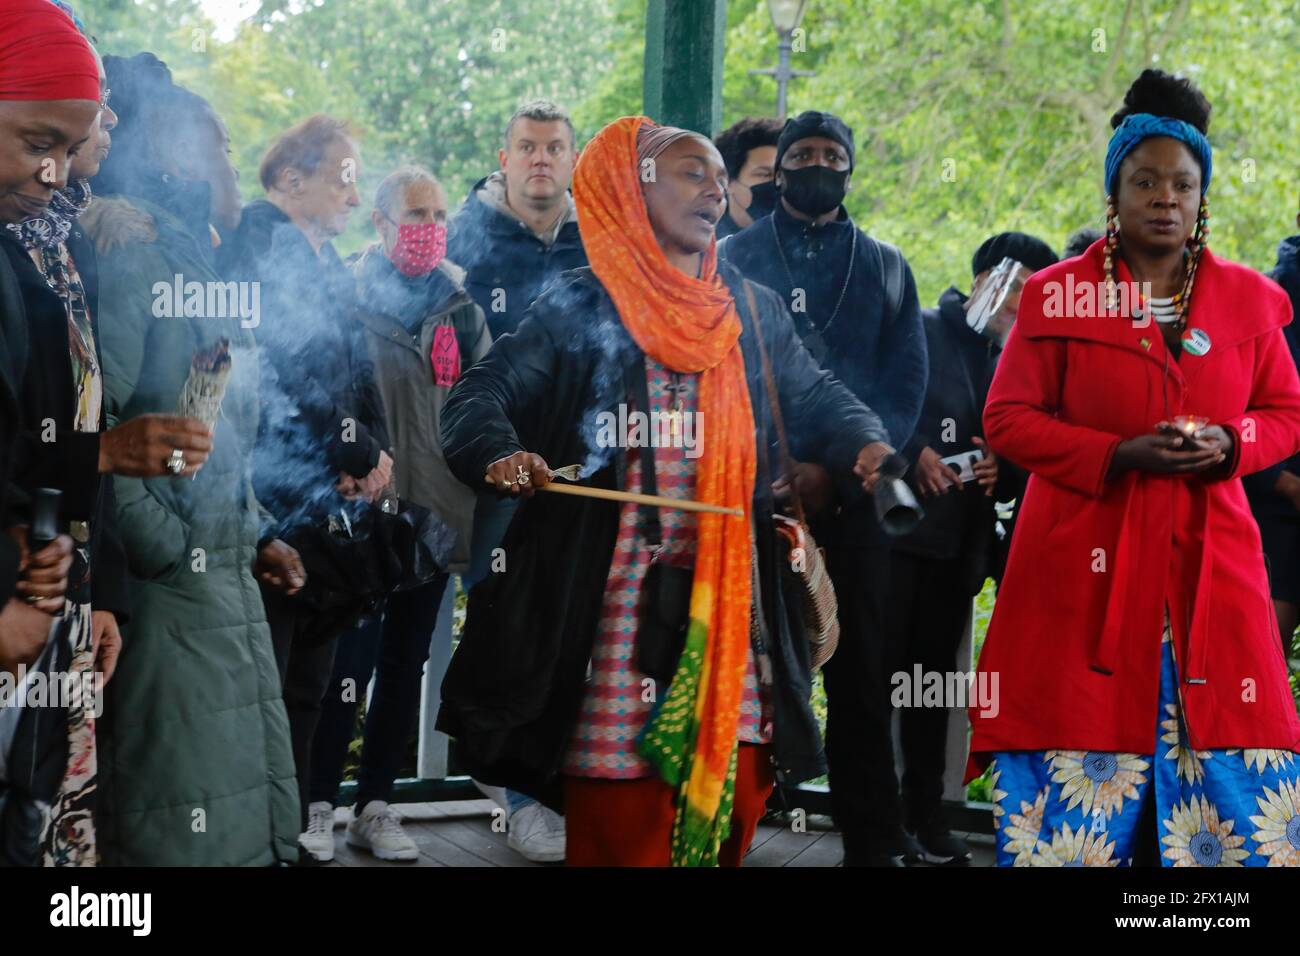 London (UK), 24 May 2021: Friends and family gather in Ruskin Park near King's College Hospital for a vigil for shot activist Sasha Johnson. Johnson w Stock Photo